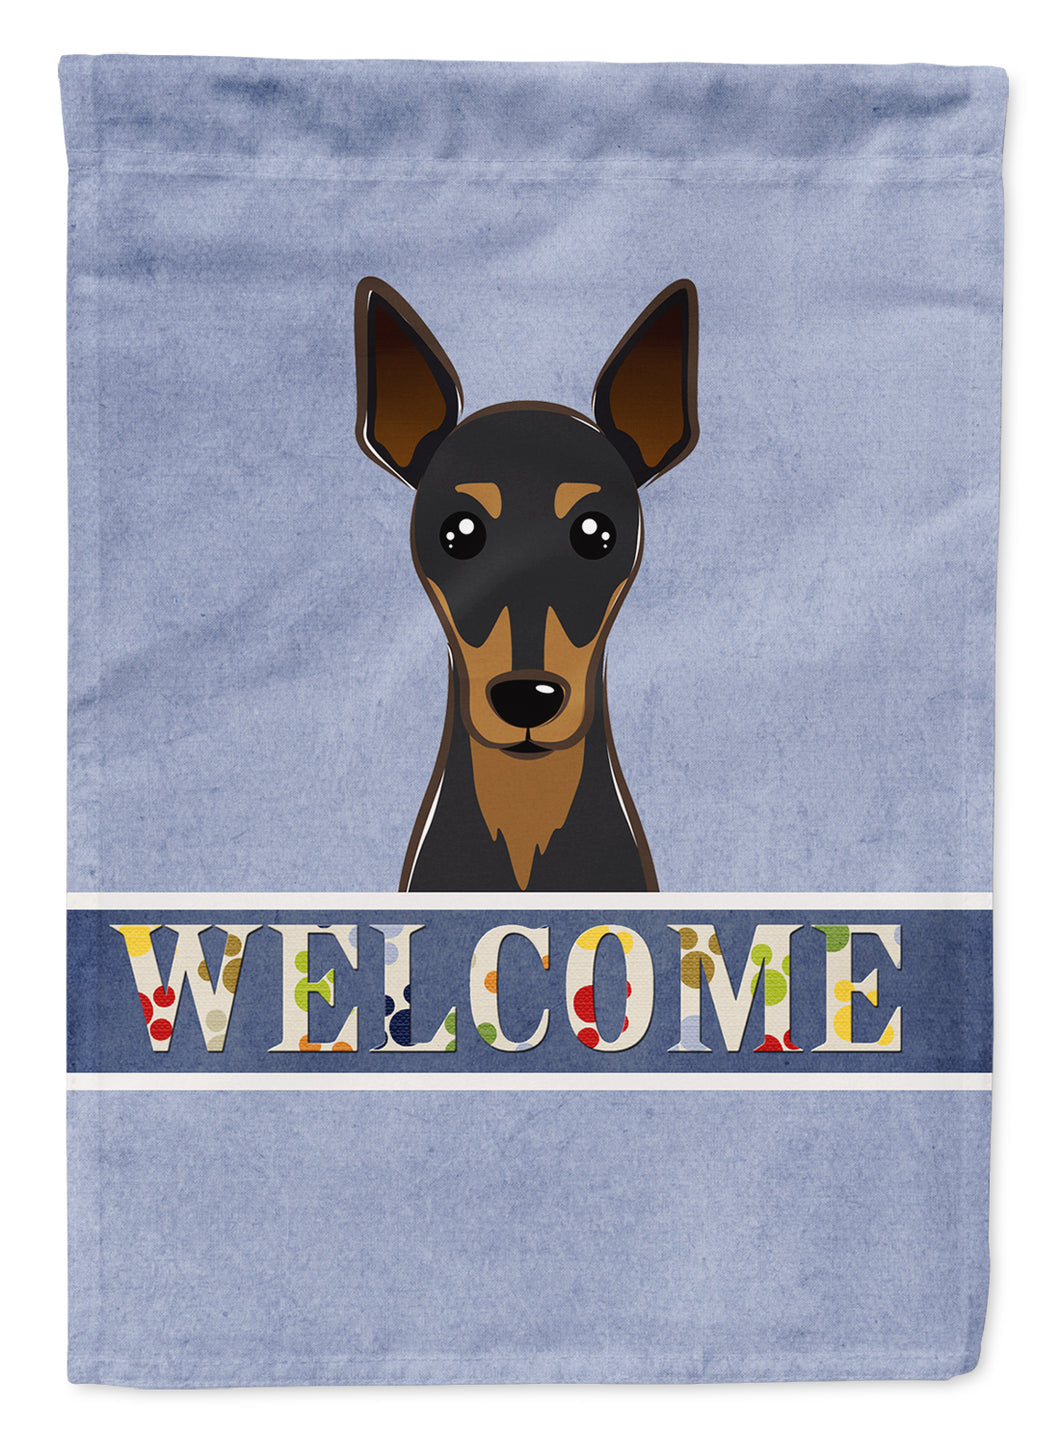 11 x 15 1/2 in. Polyester Min Pin Welcome Garden Flag 2-Sided 2-Ply